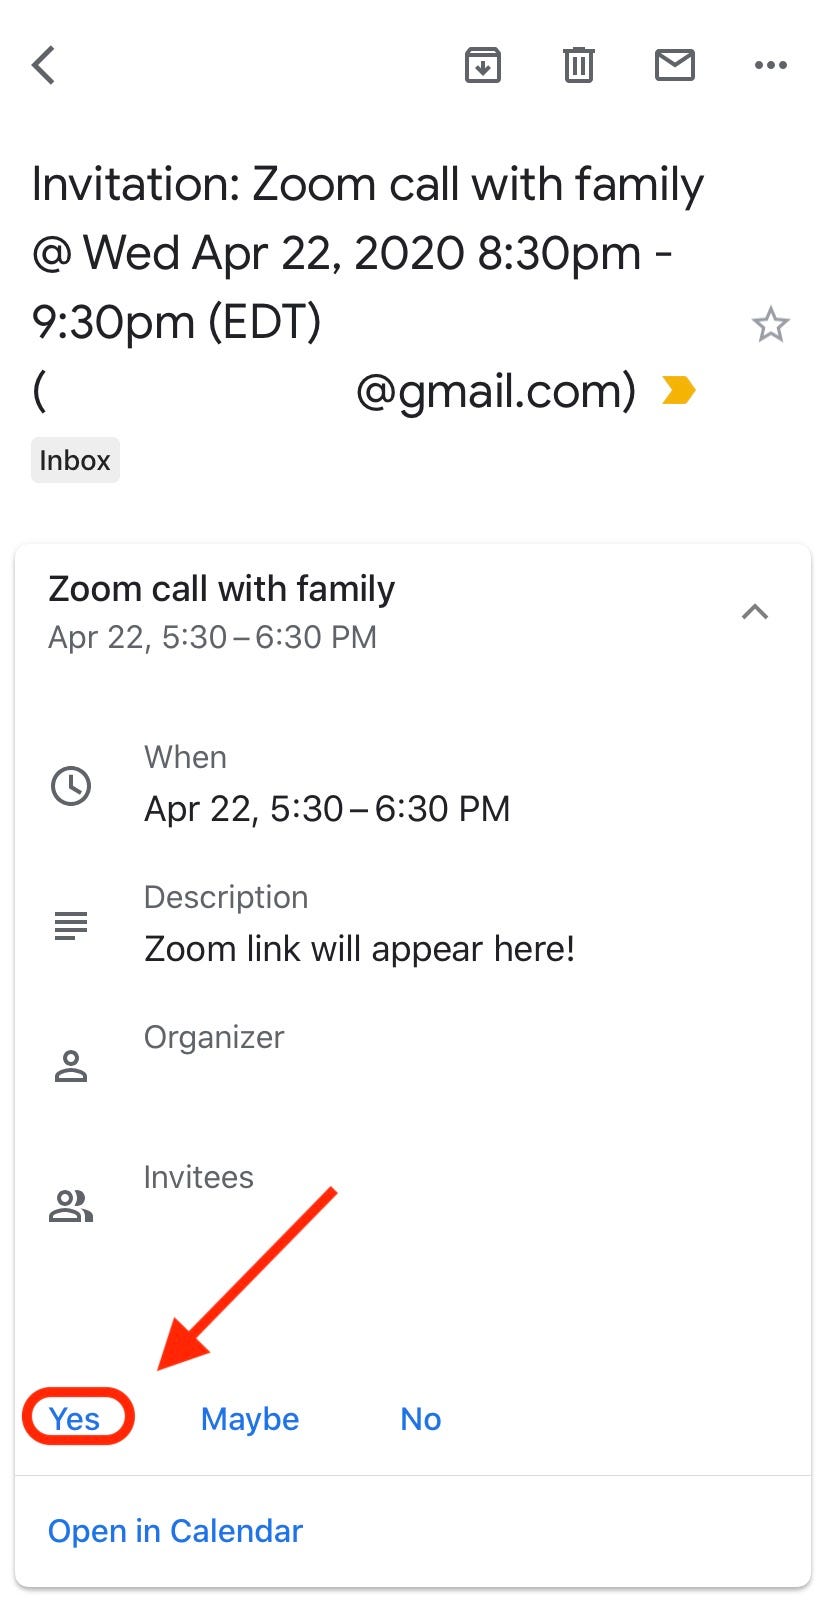 How to accept a Google Calendar invite on your computer or mobile